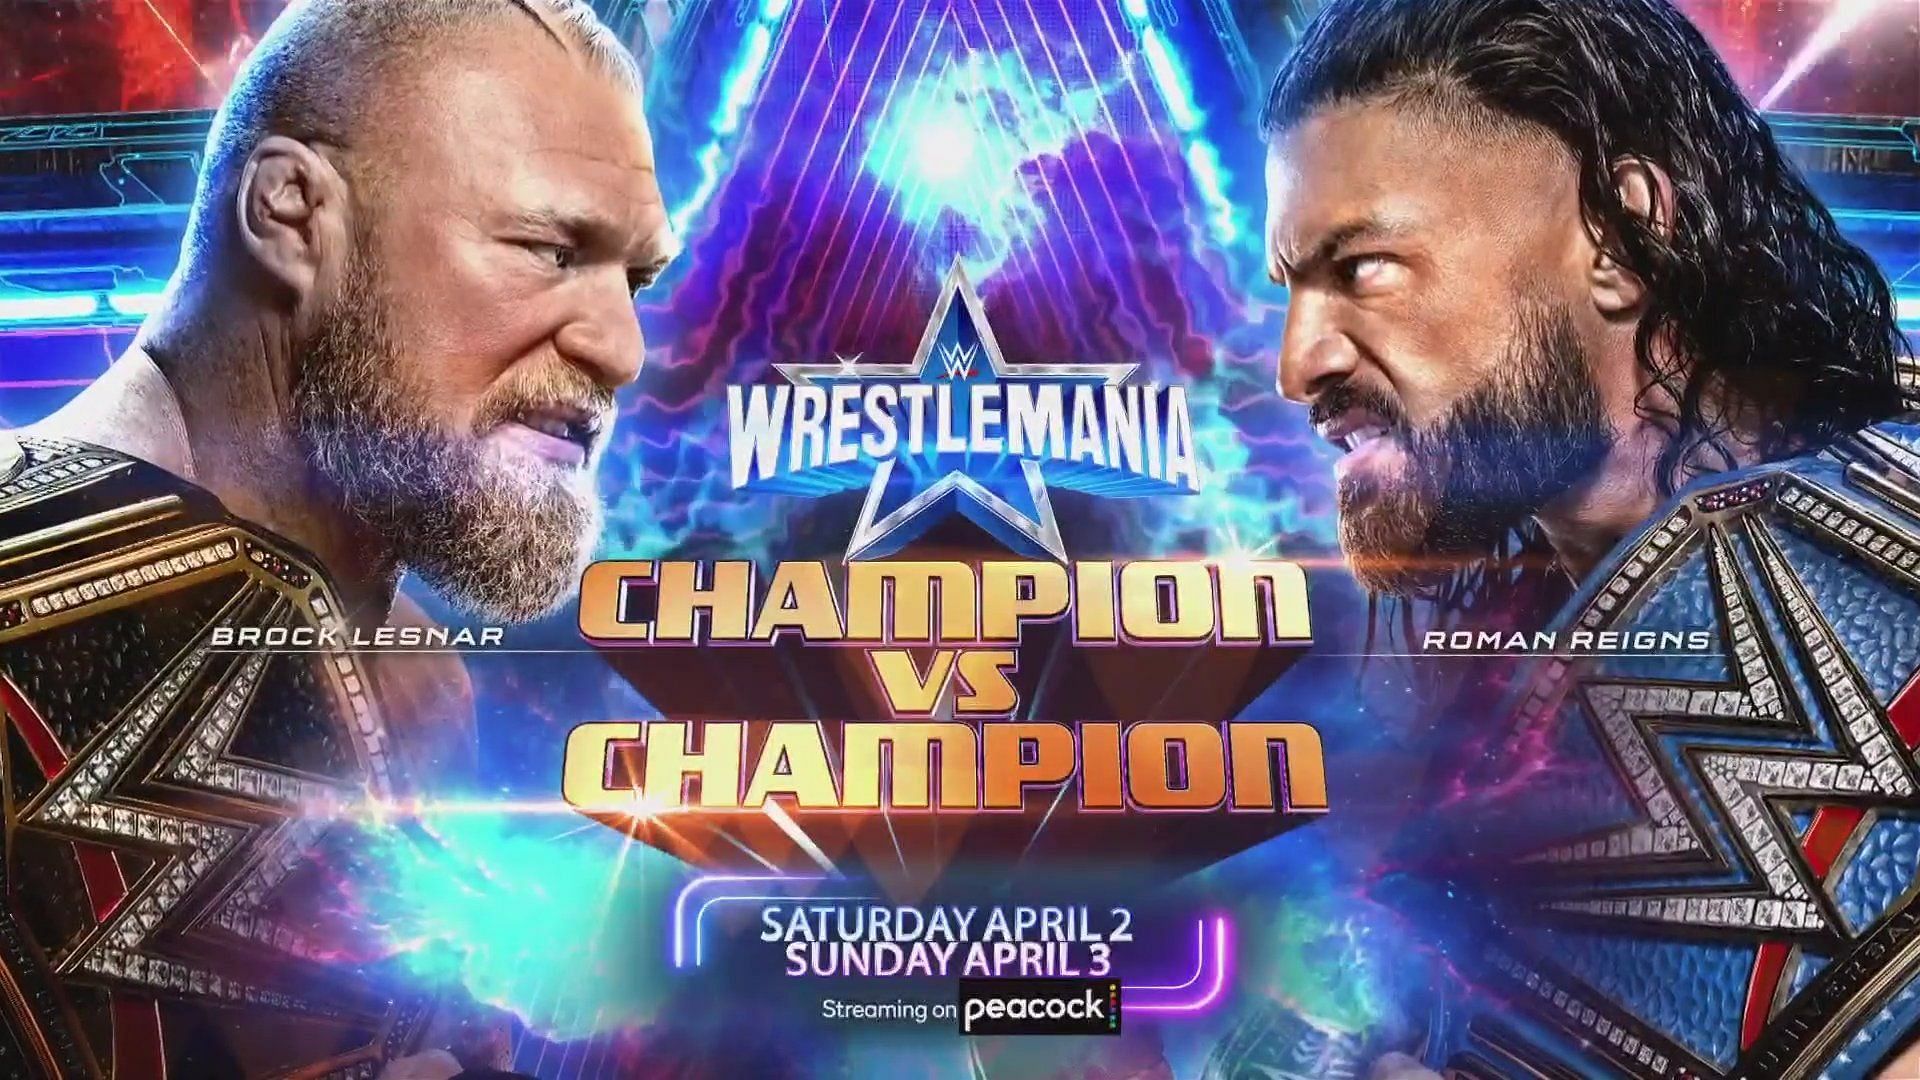 Brock Lesnar vs Roman Reigns is scheduled as the main event of WrestleMania Night Two